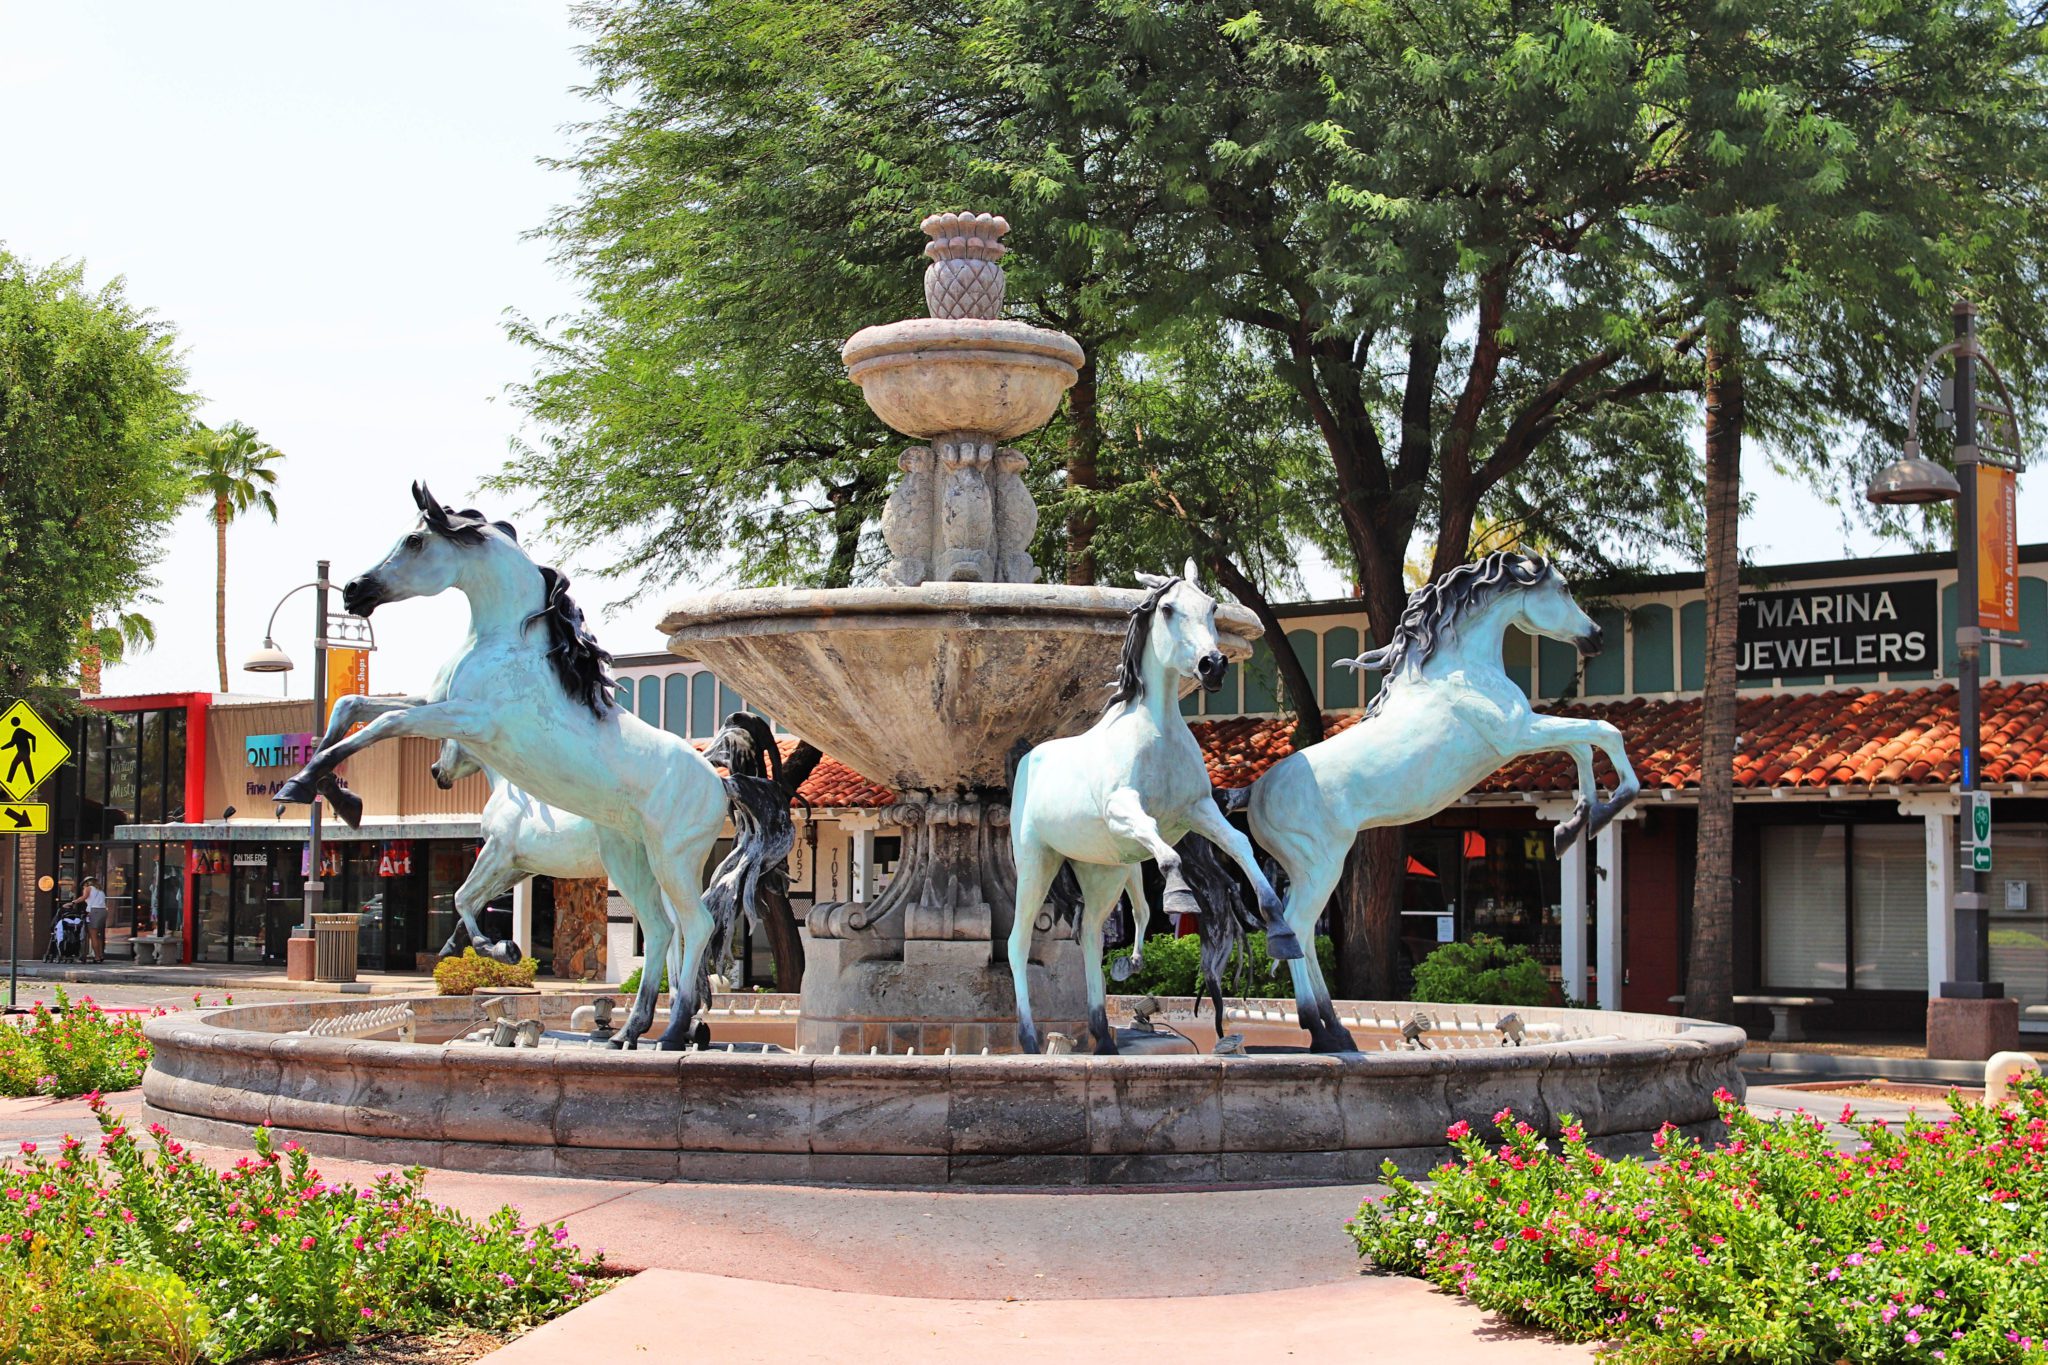 Scottsdale's 5th Avenue Shops offer unique and eclectic boutique shopping | What to do in Scottsdale Arizona #scottsdale #arizona #5thavenueshops